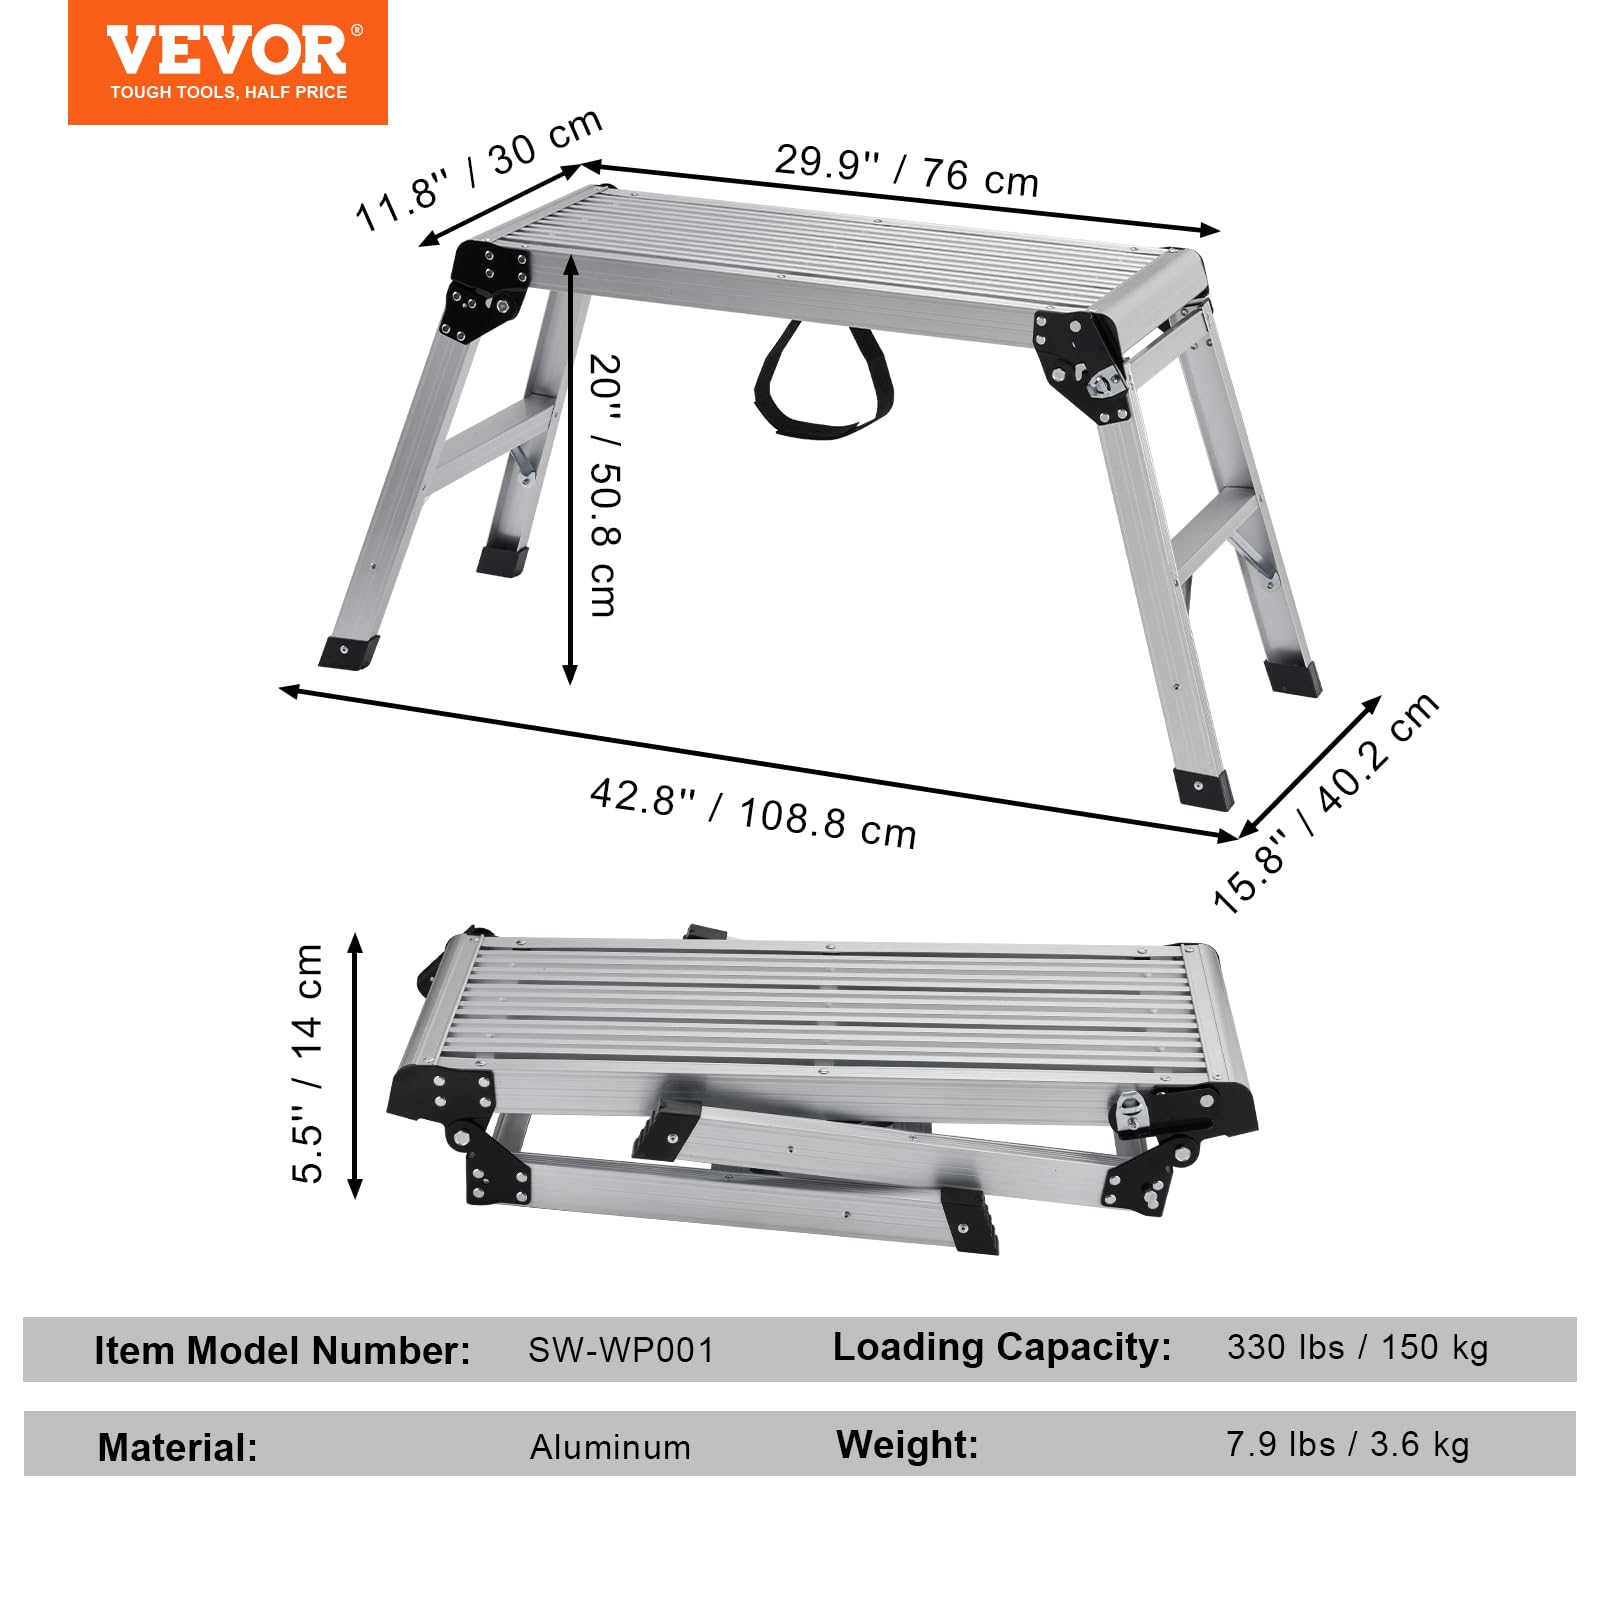 VEVOR Folding Work Platform, 30x12x20 Inch Aluminum Drywall Stool Ladder, 330 lbs Load Capacity Heavy Duty Work Bench w/Non-Slip Feet, Ideal for Washing Vehicles, Cleaning, Painting, Decorating